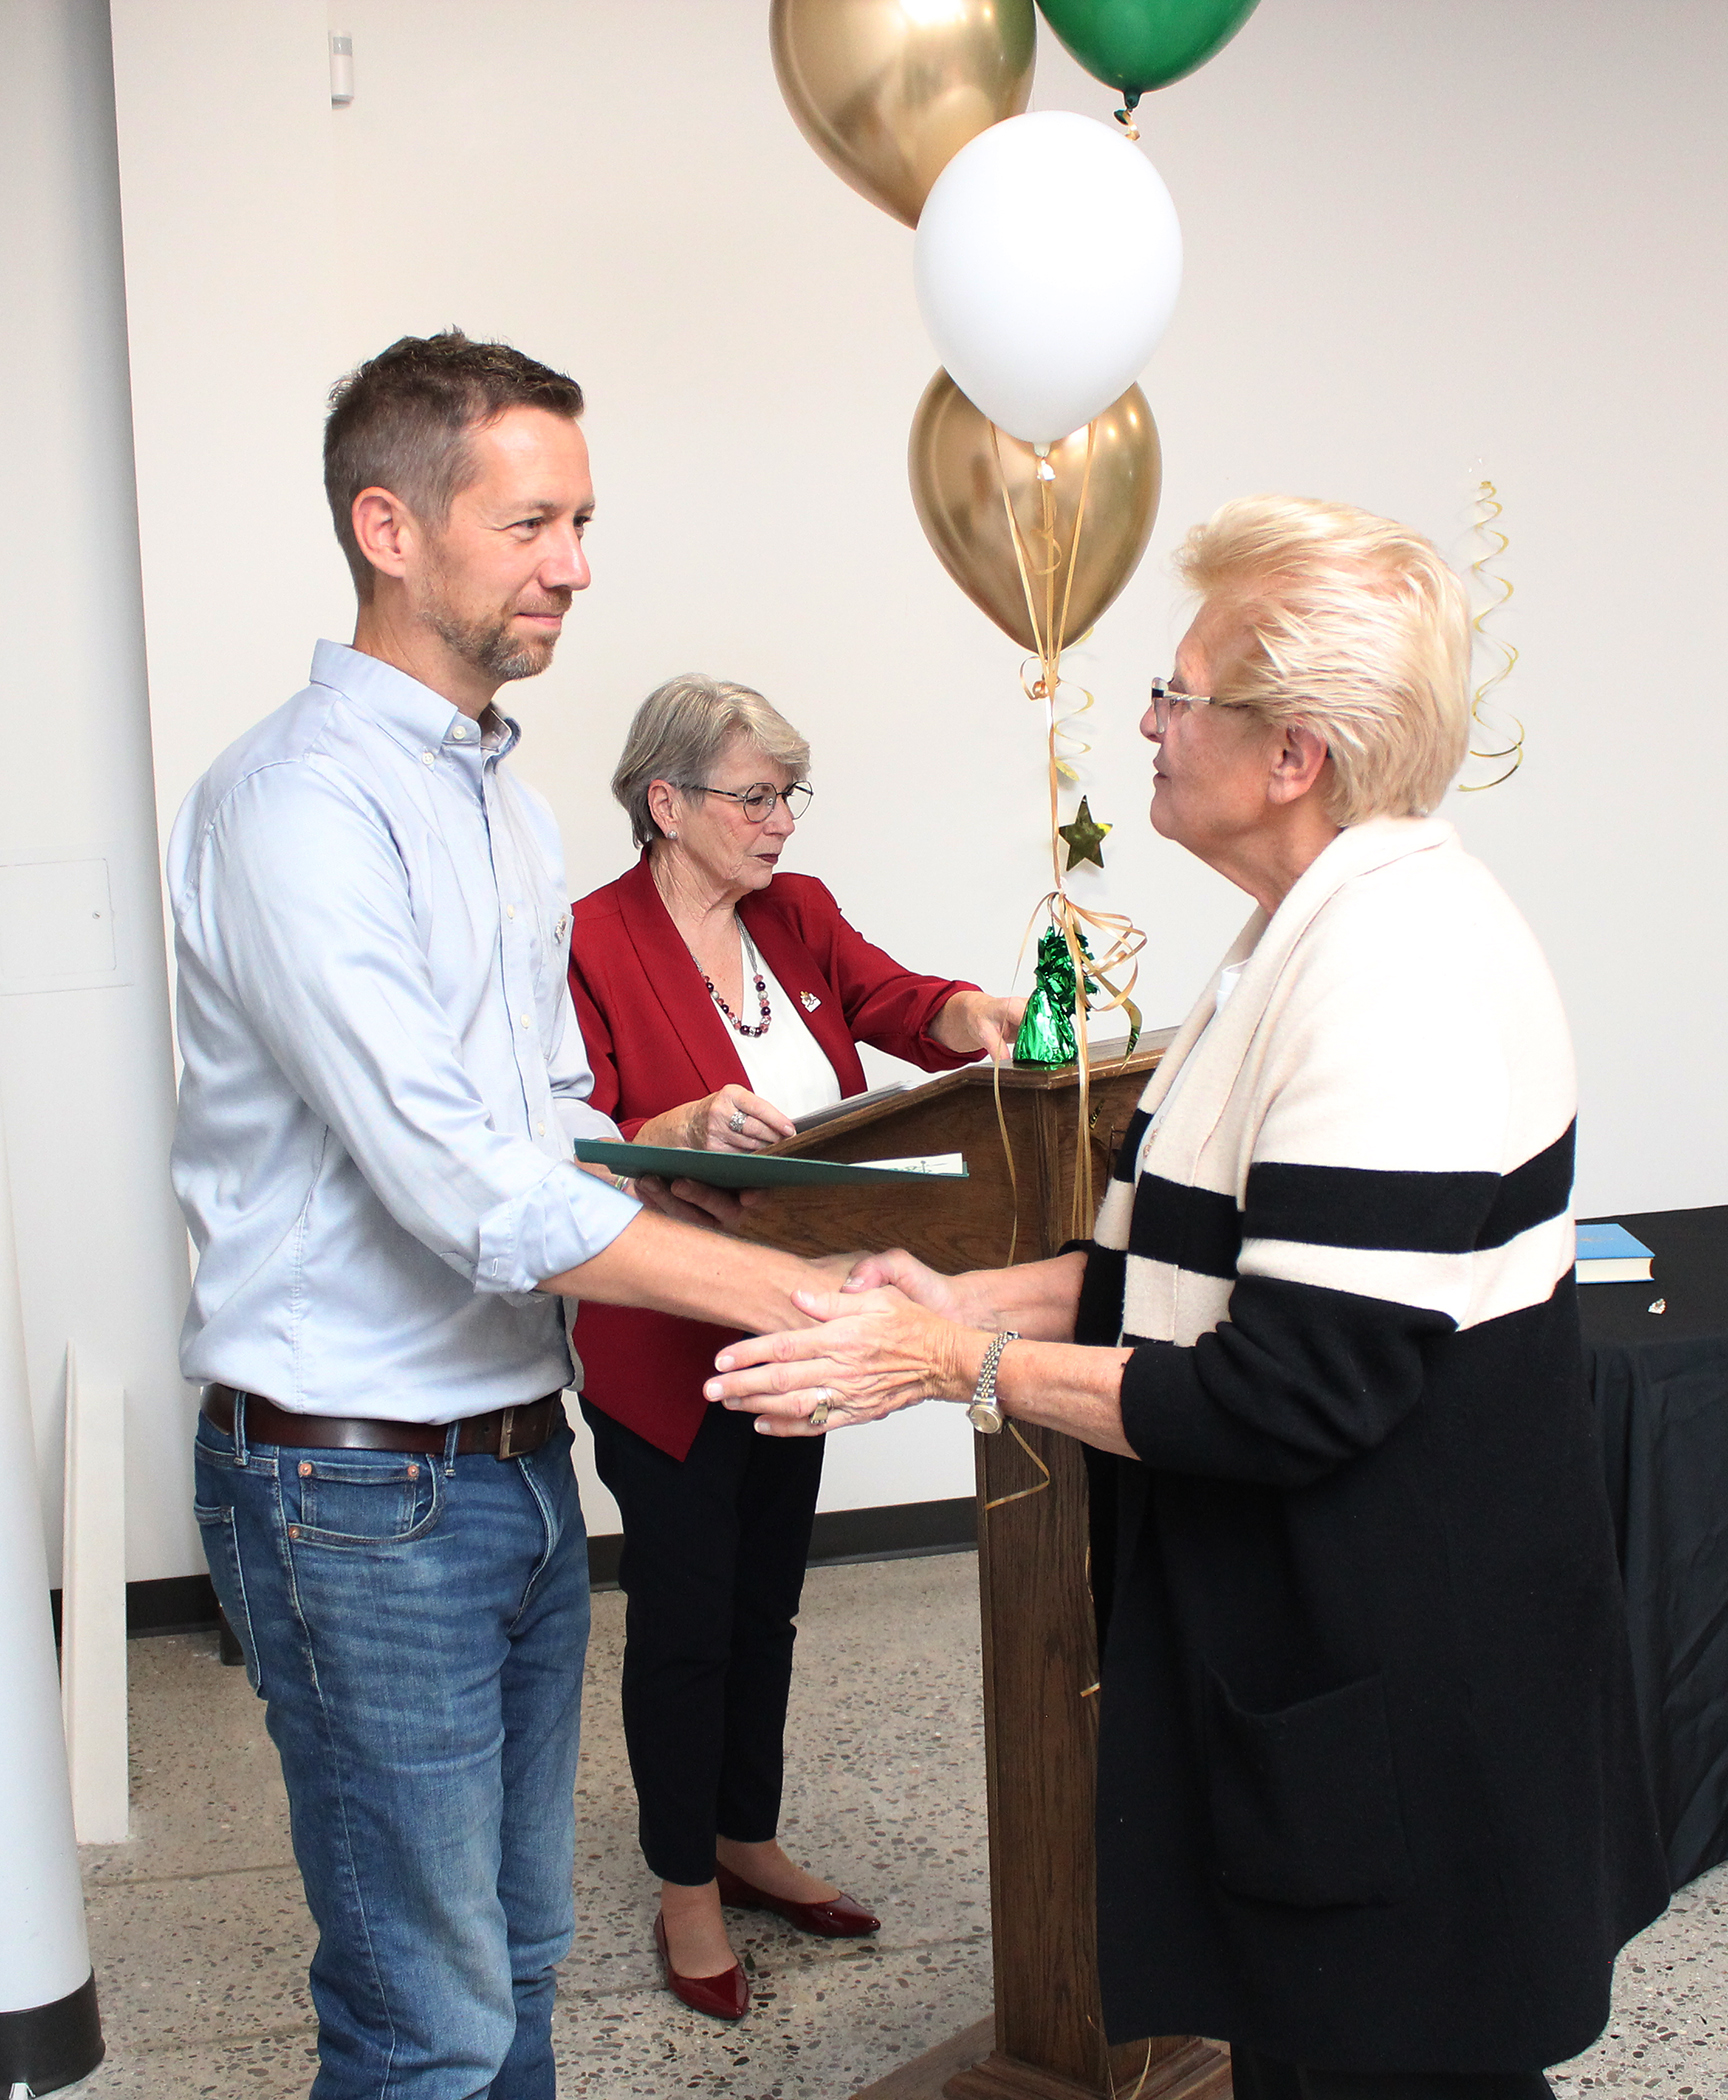 Scott Antonides accepts a certificate from Councillor Joann Chechalk, Mayor Ganann in the background